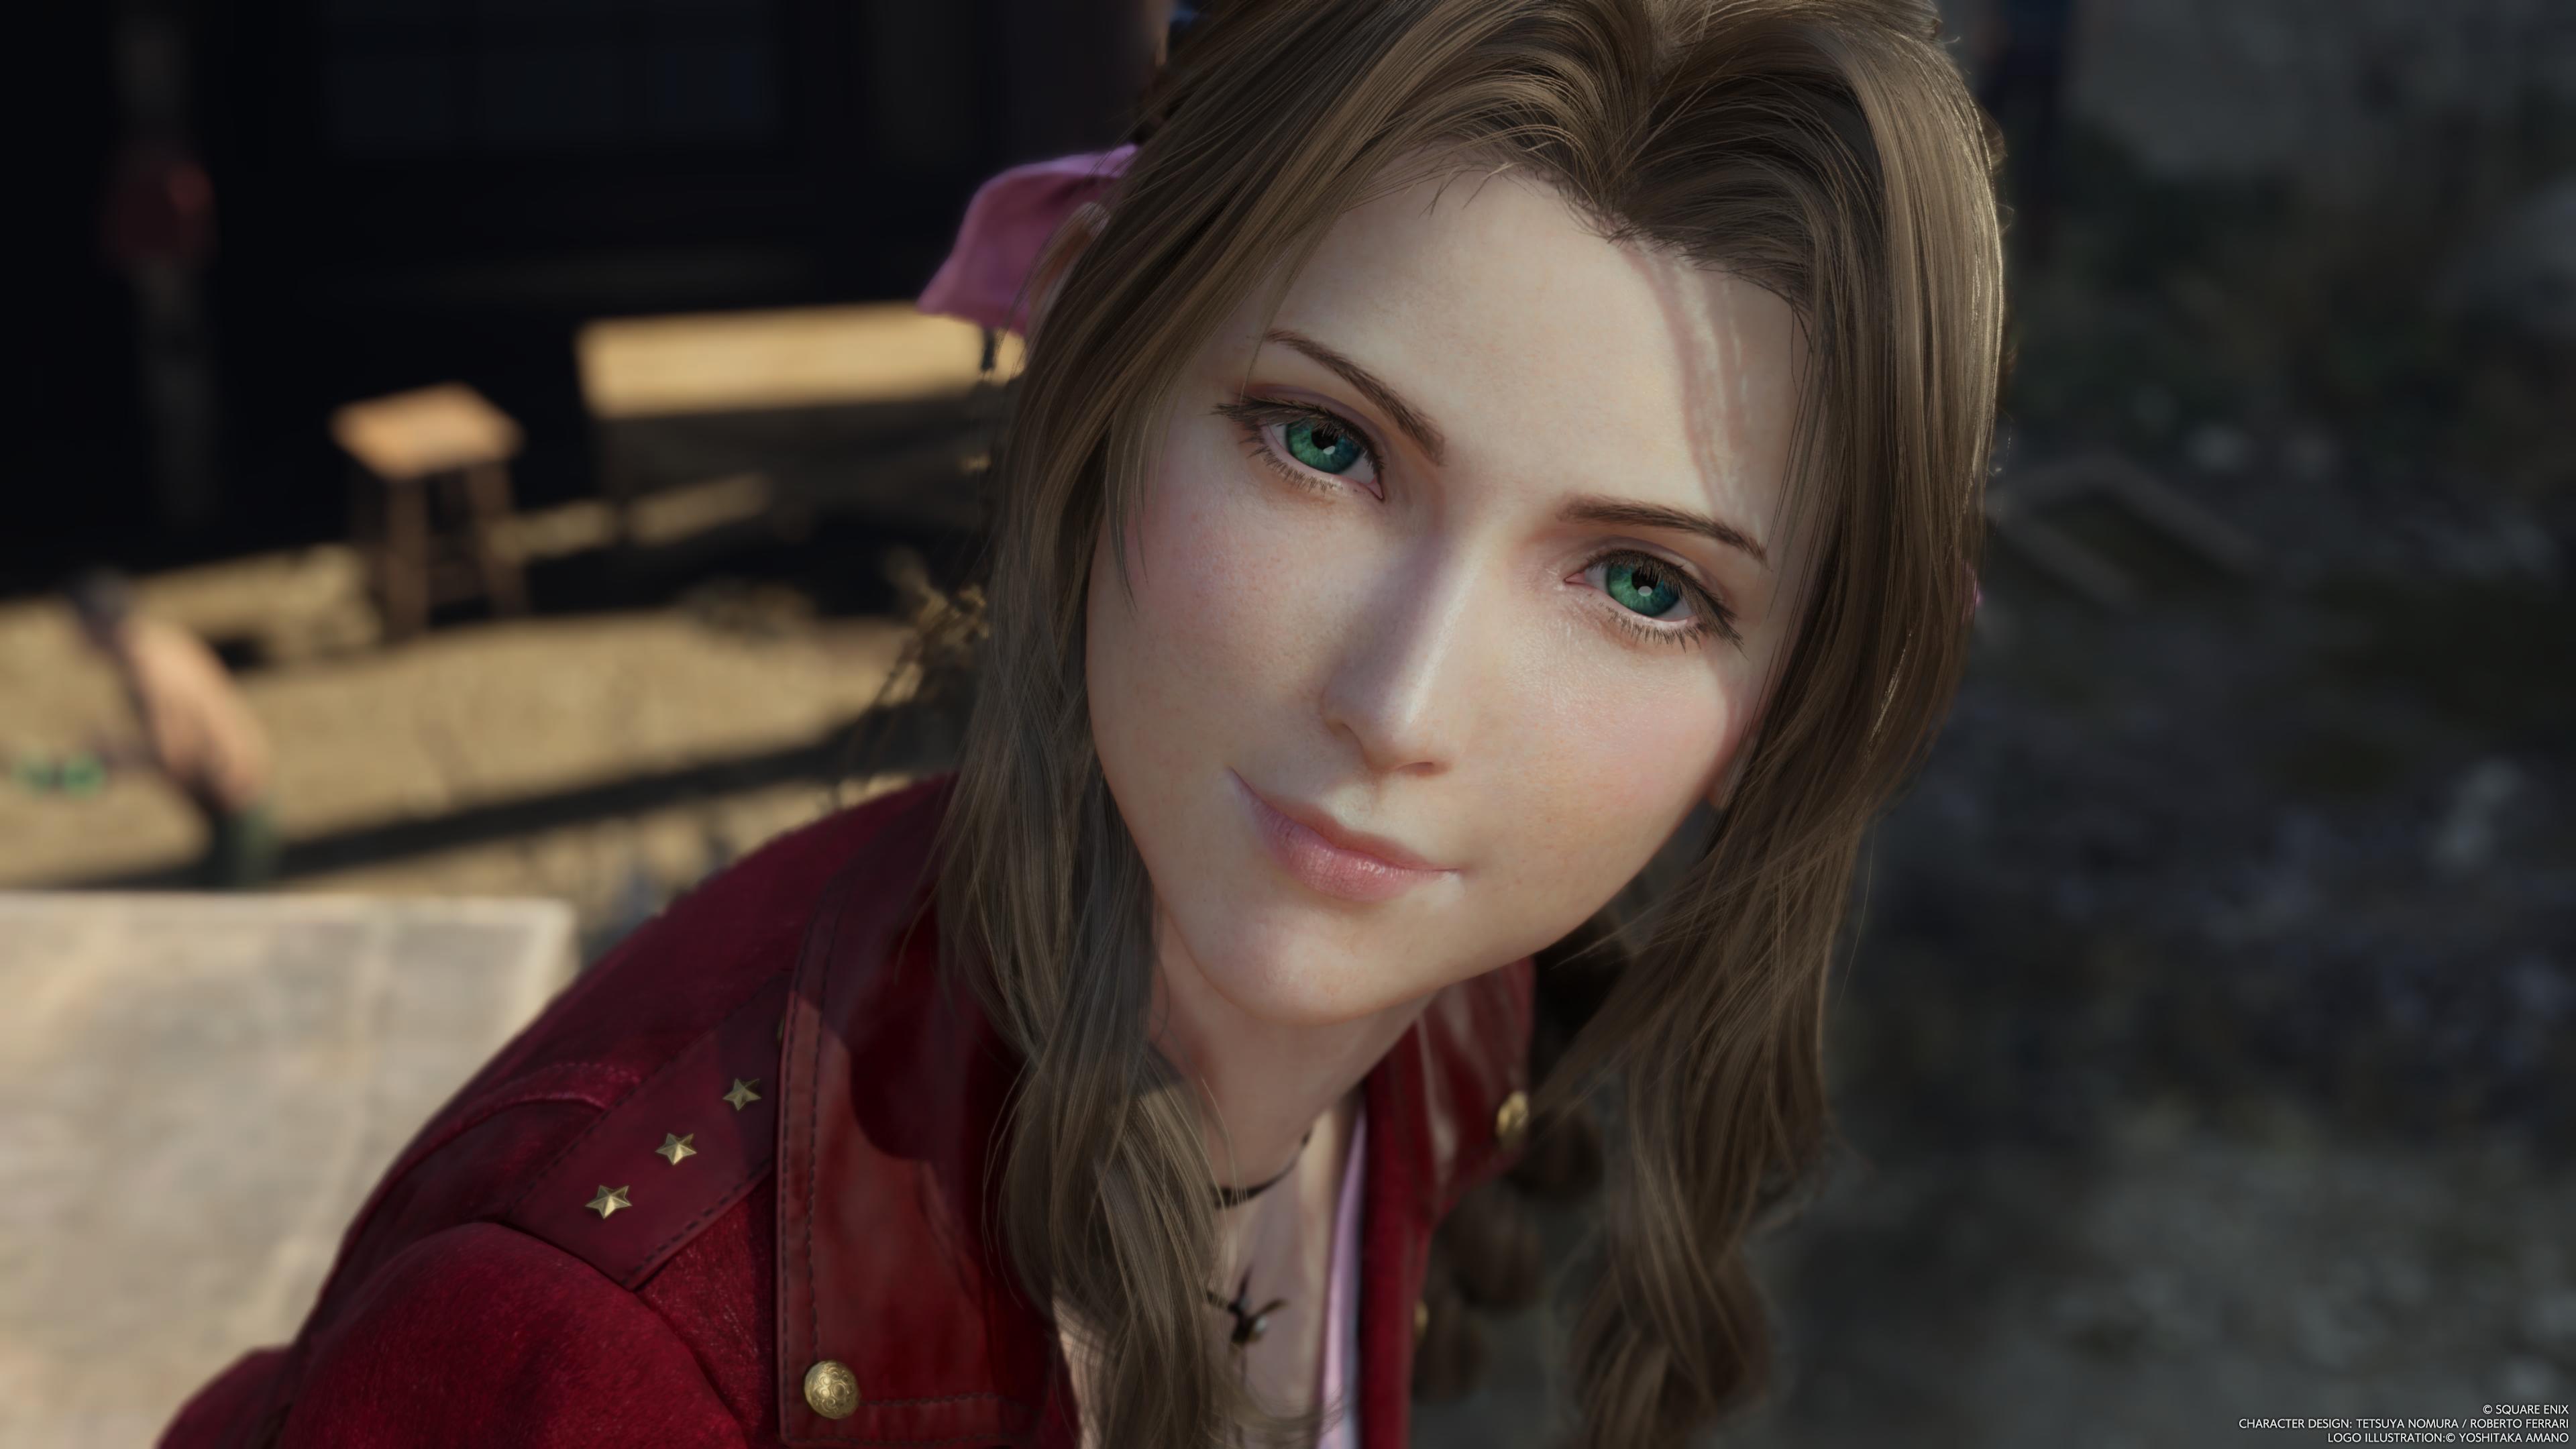 General 3840x2160 Final Fantasy VII: Rebirth Aerith Gainsborough Final Fantasy video games video game girls JRPGs Square Enix long hair video game characters CGI closed mouth smiling brunette blue eyes looking at viewer face closeup watermarked Yoshitaka Amano blurred video game art screen shot blurry background